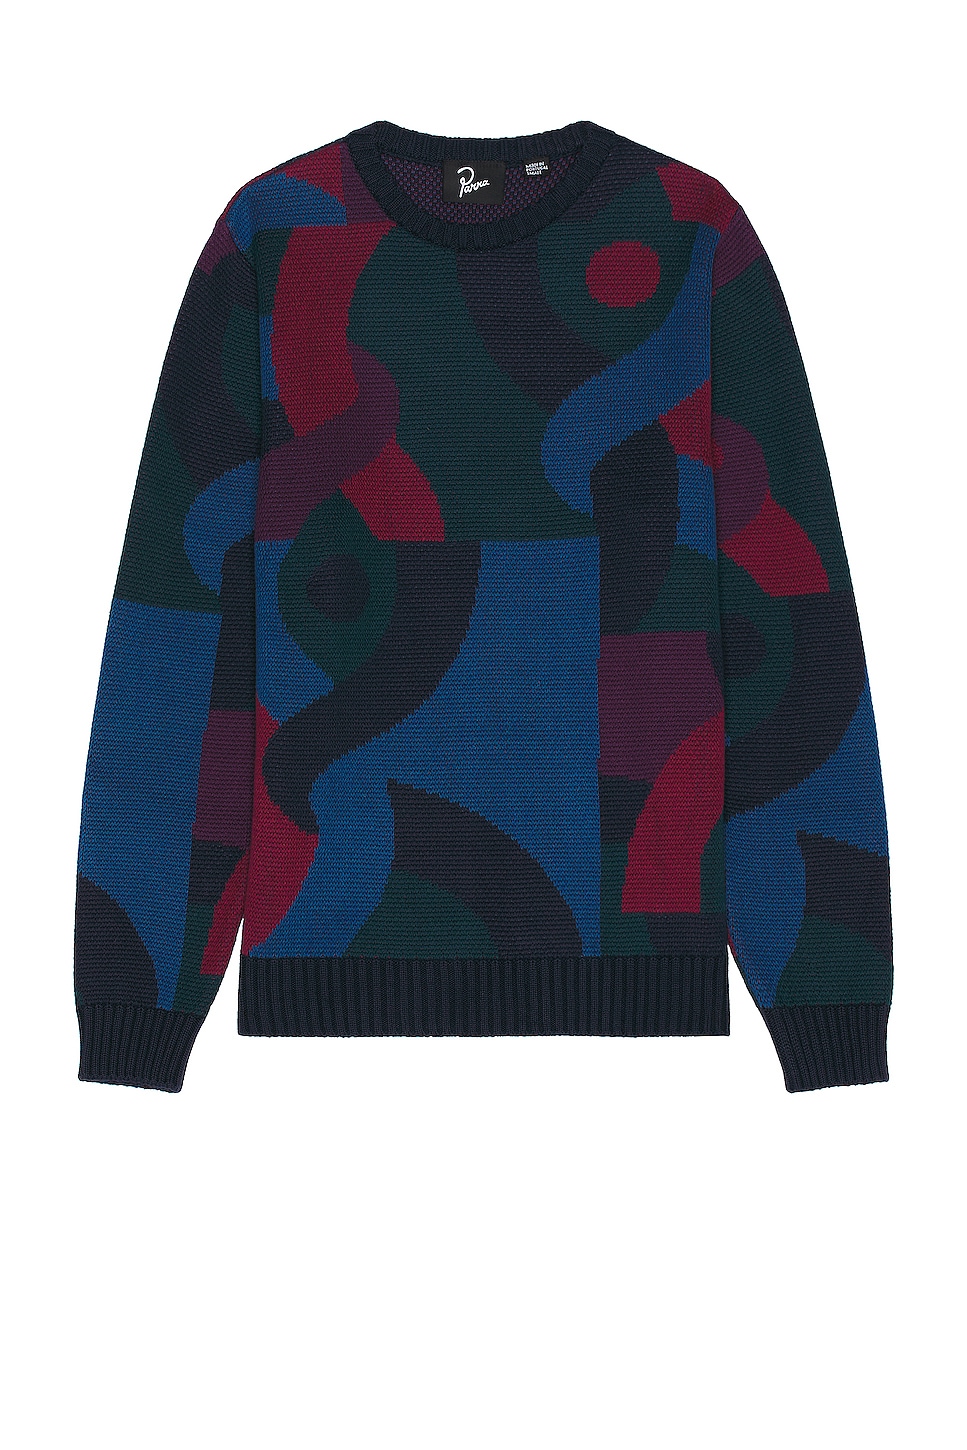 Image 1 of By Parra Knotted Knitted Sweater in Multi